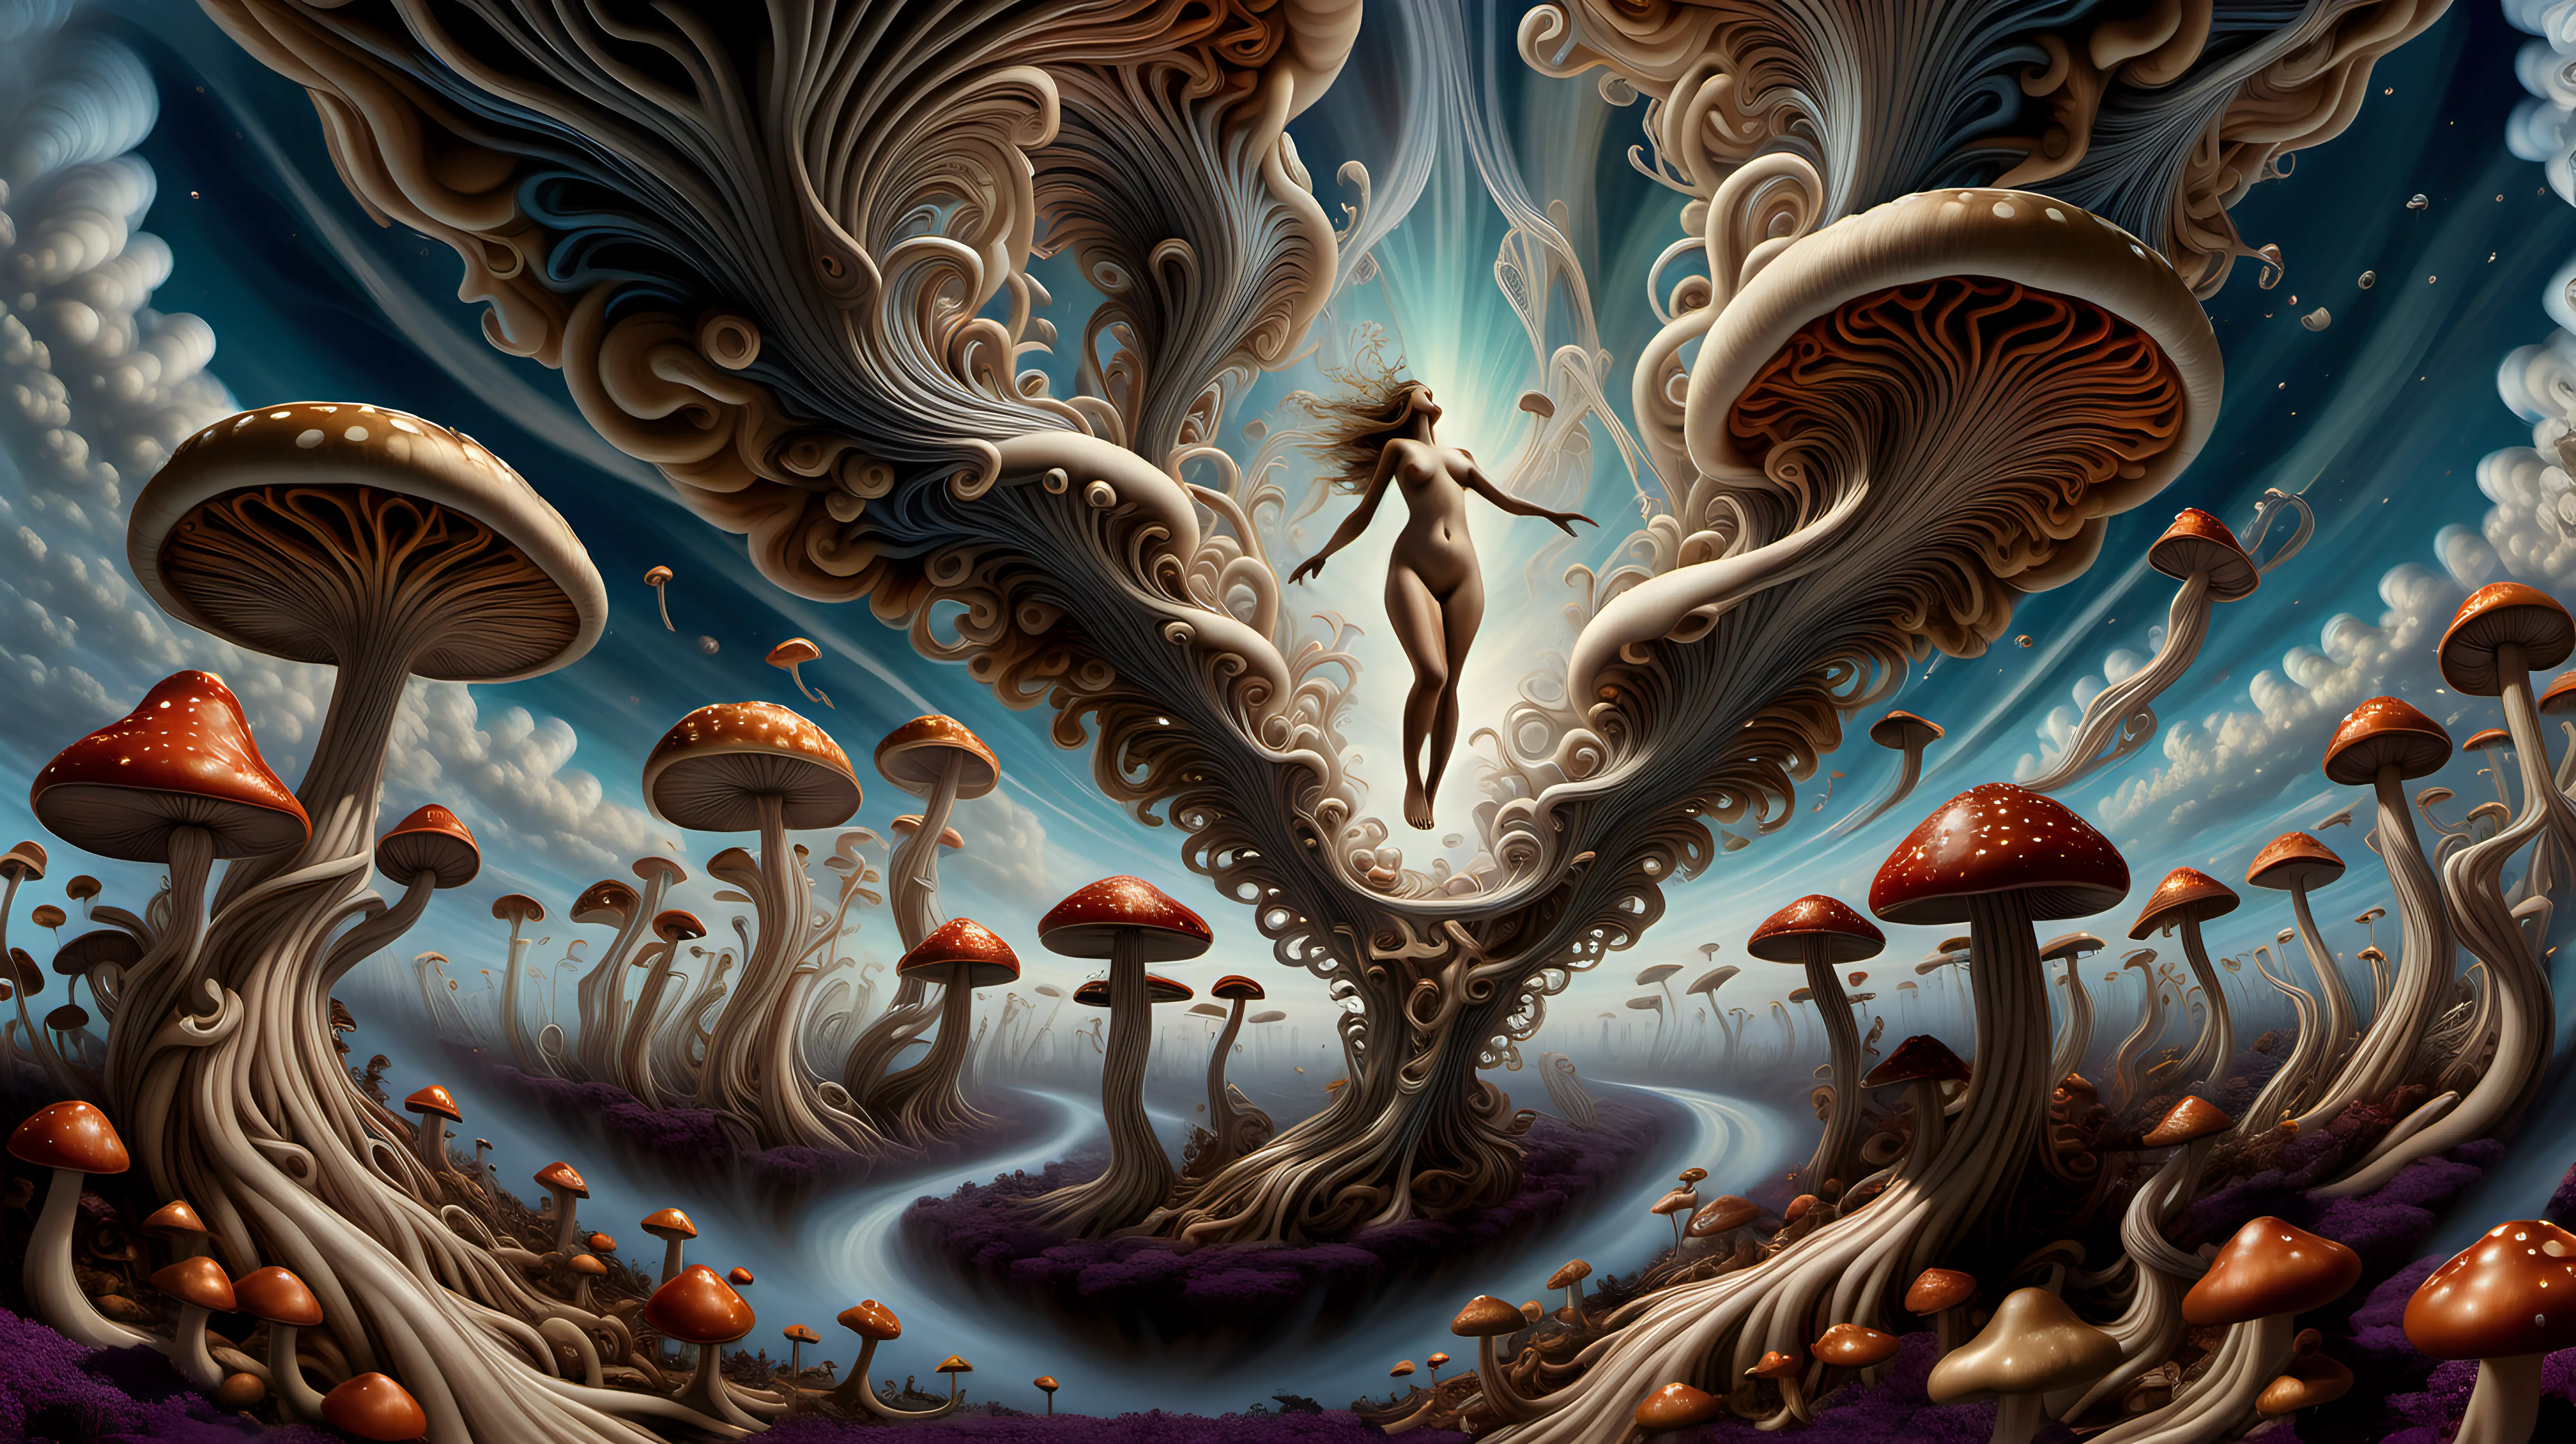 Euphoric Nude Female Figure Soaring Amidst Psychedelic Mushroom Forest